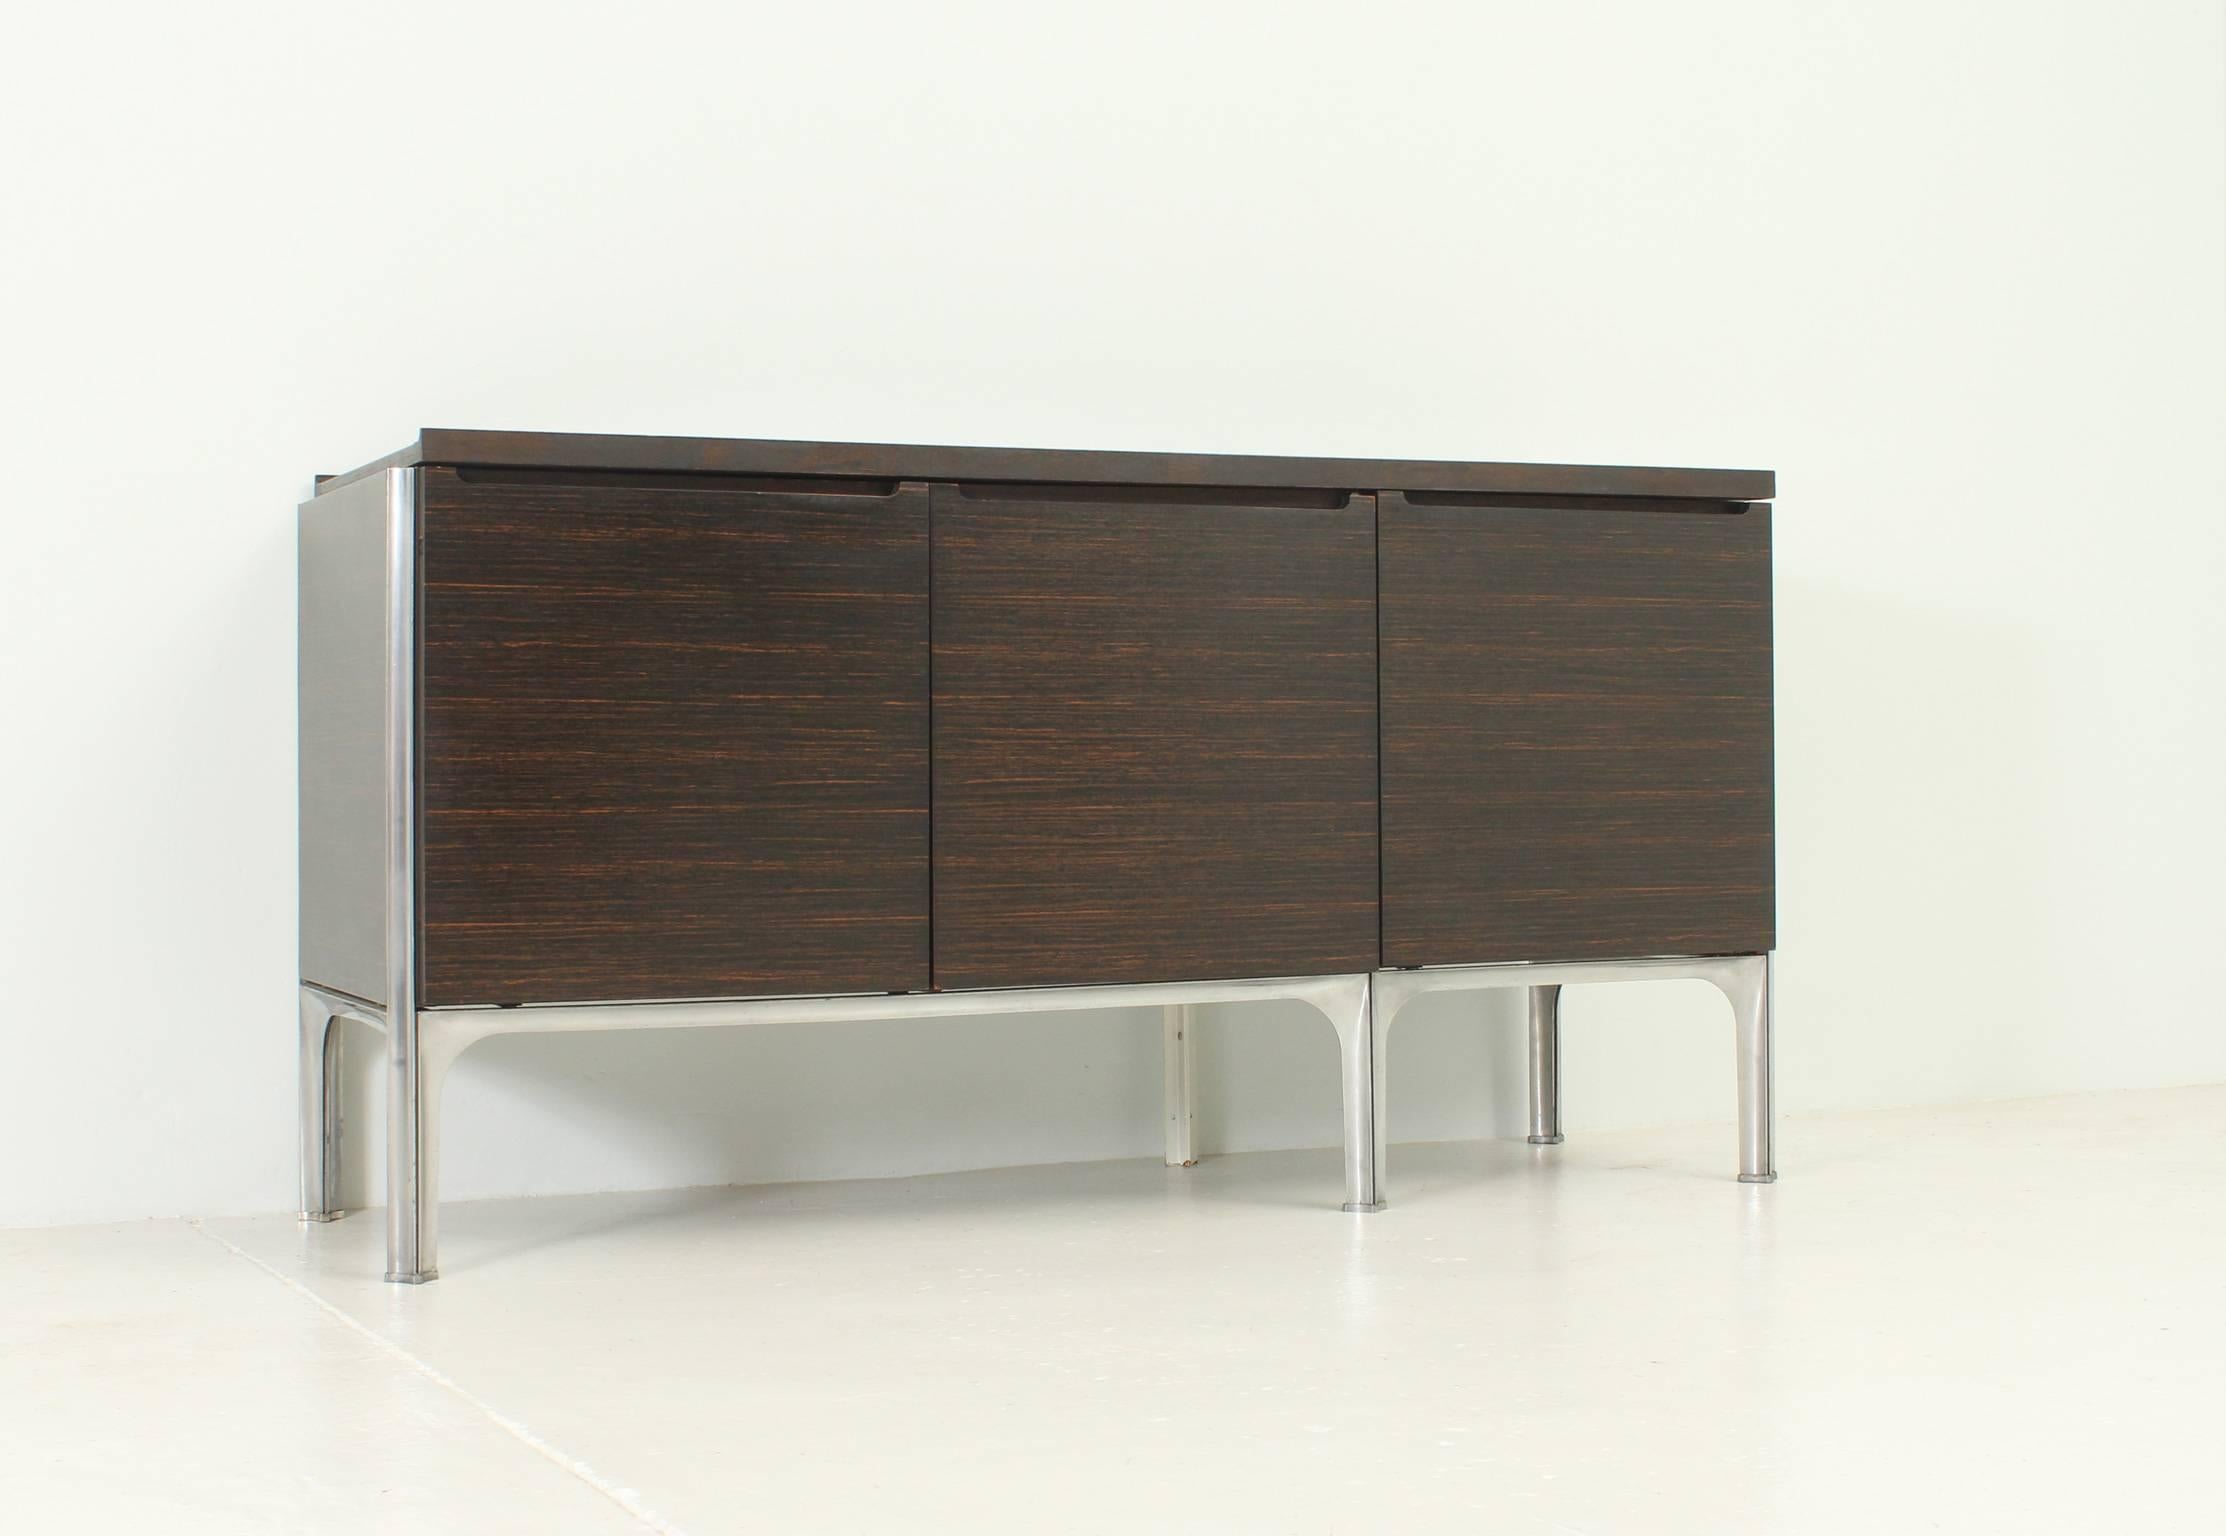 Rare sideboard designed in 1960's by Raymond Loewy and edited by DF 2000, France. Macassar ebony wood, lacquered wood and steel structure. Three spaces with one drawer and removable tray for bottles.